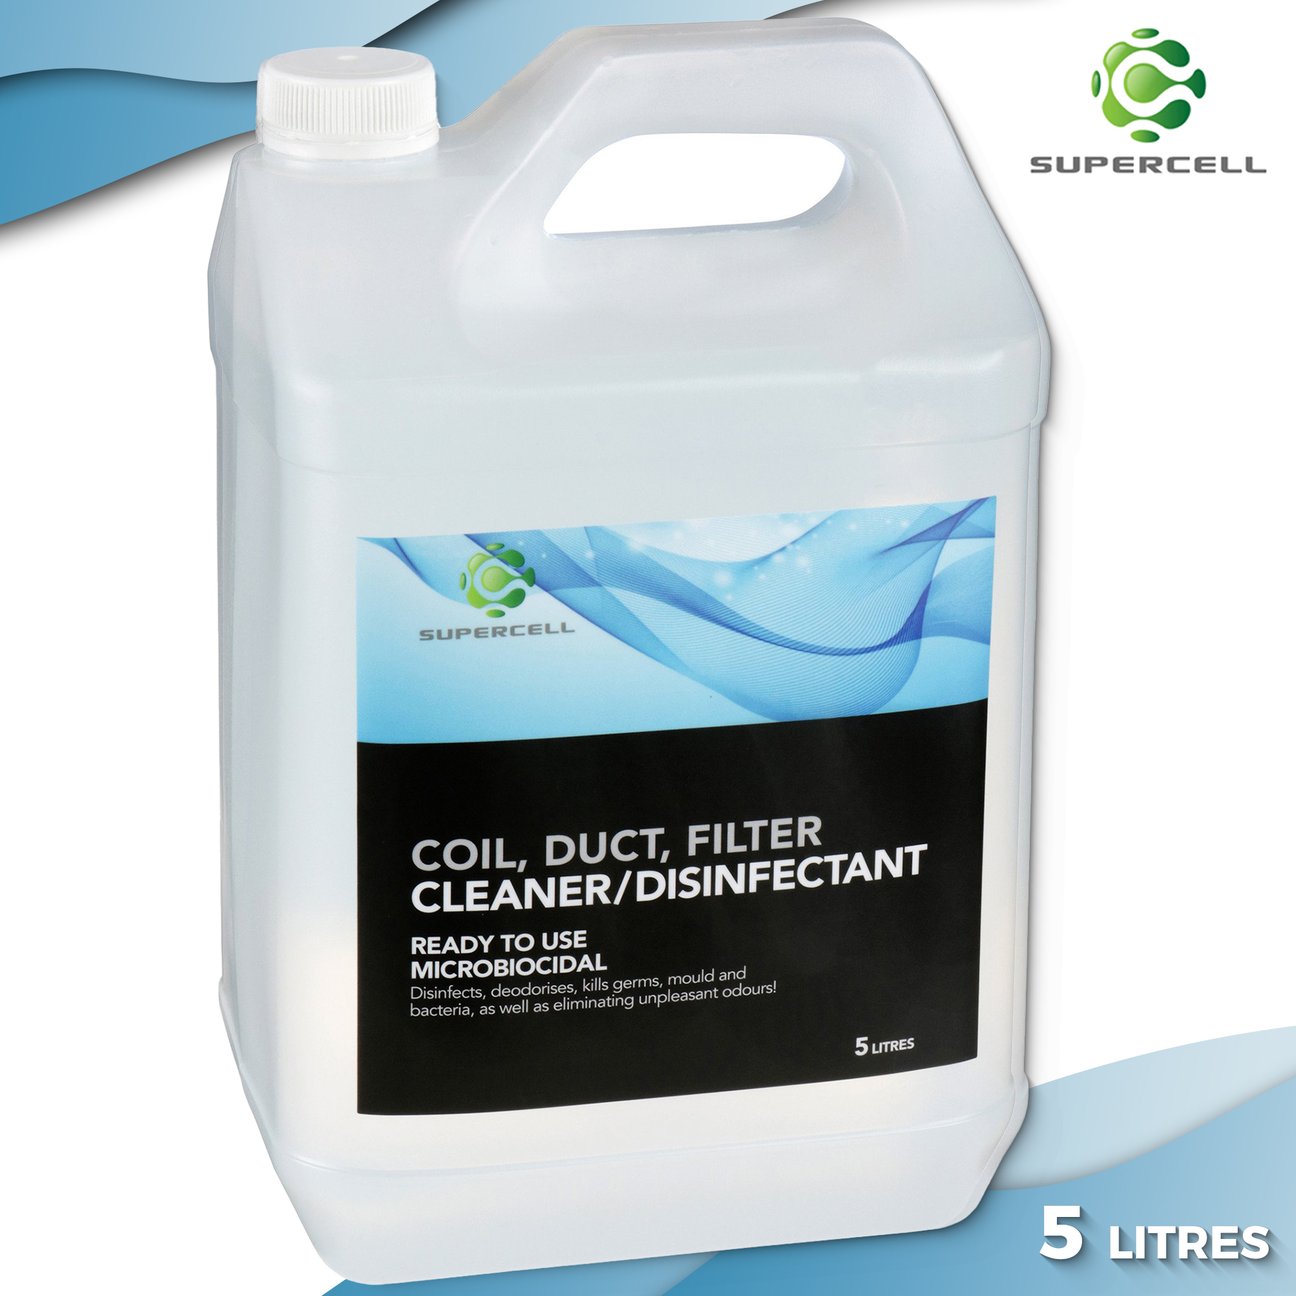 Supercell Coil Duct & Filter Disinfectant Cleaner 5L - supercellnz